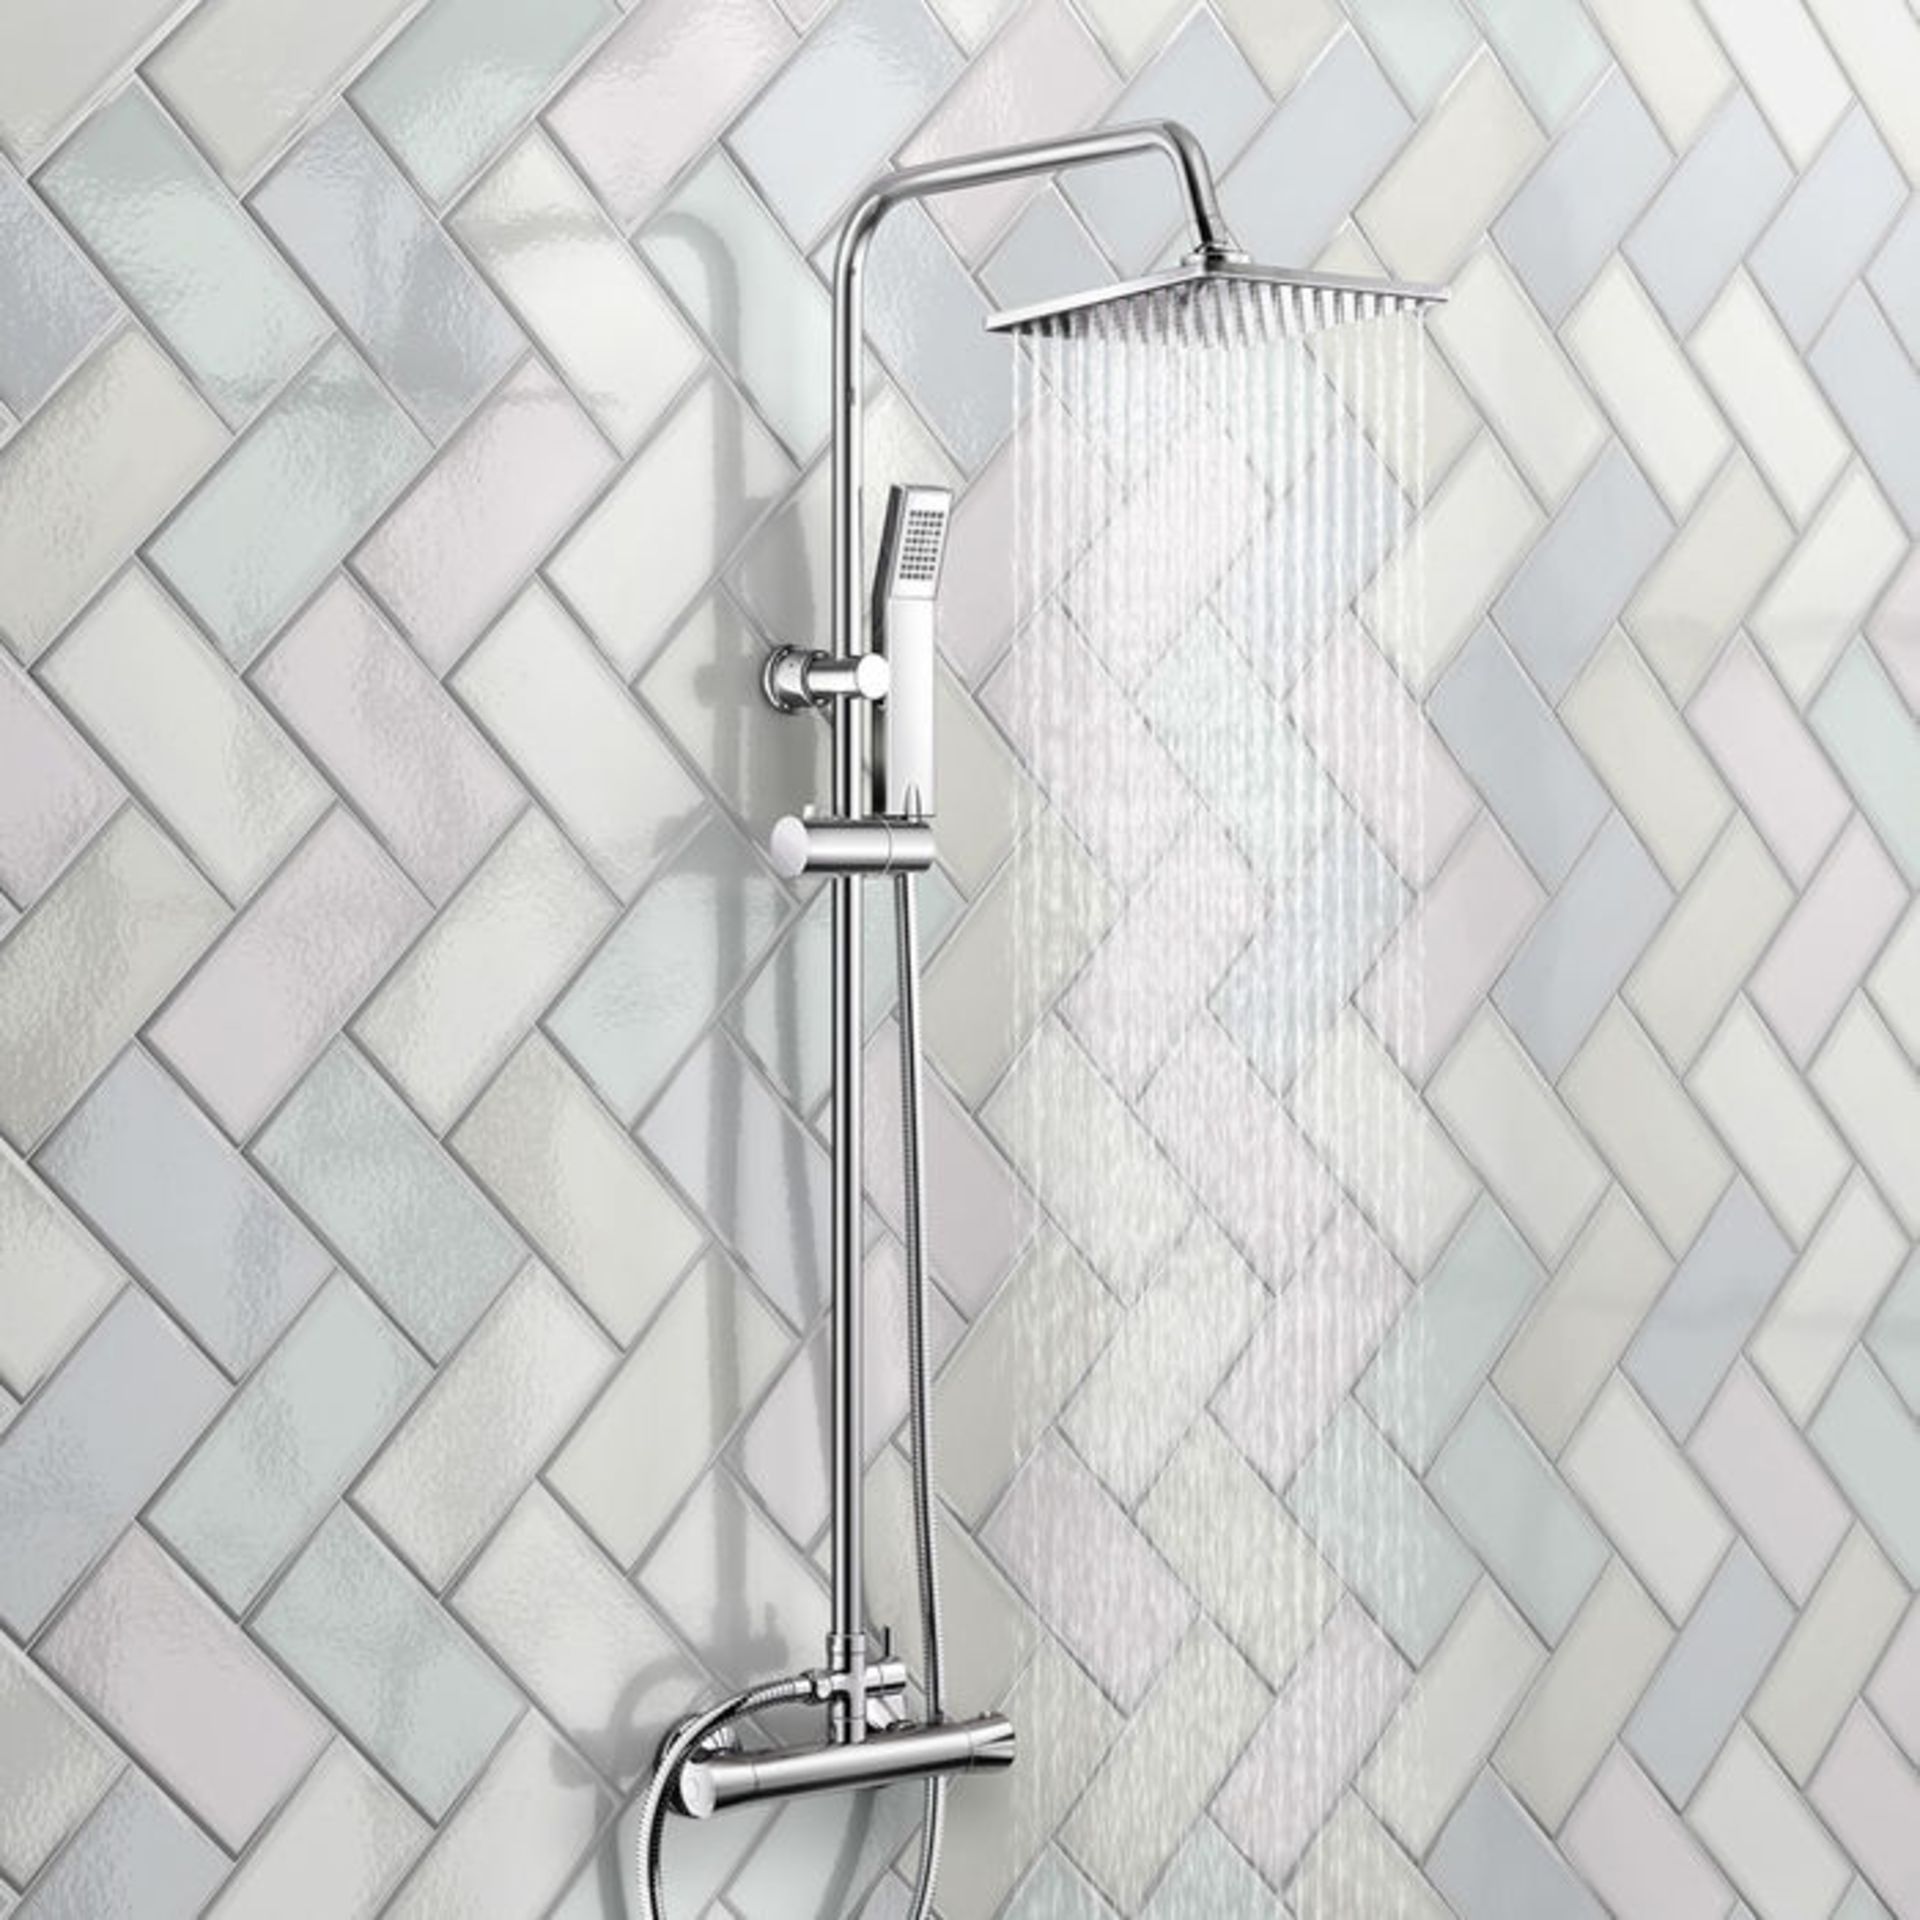 (ST76) Square Exposed Thermostatic Shower Kit Medium Head. Curved features and contemporary